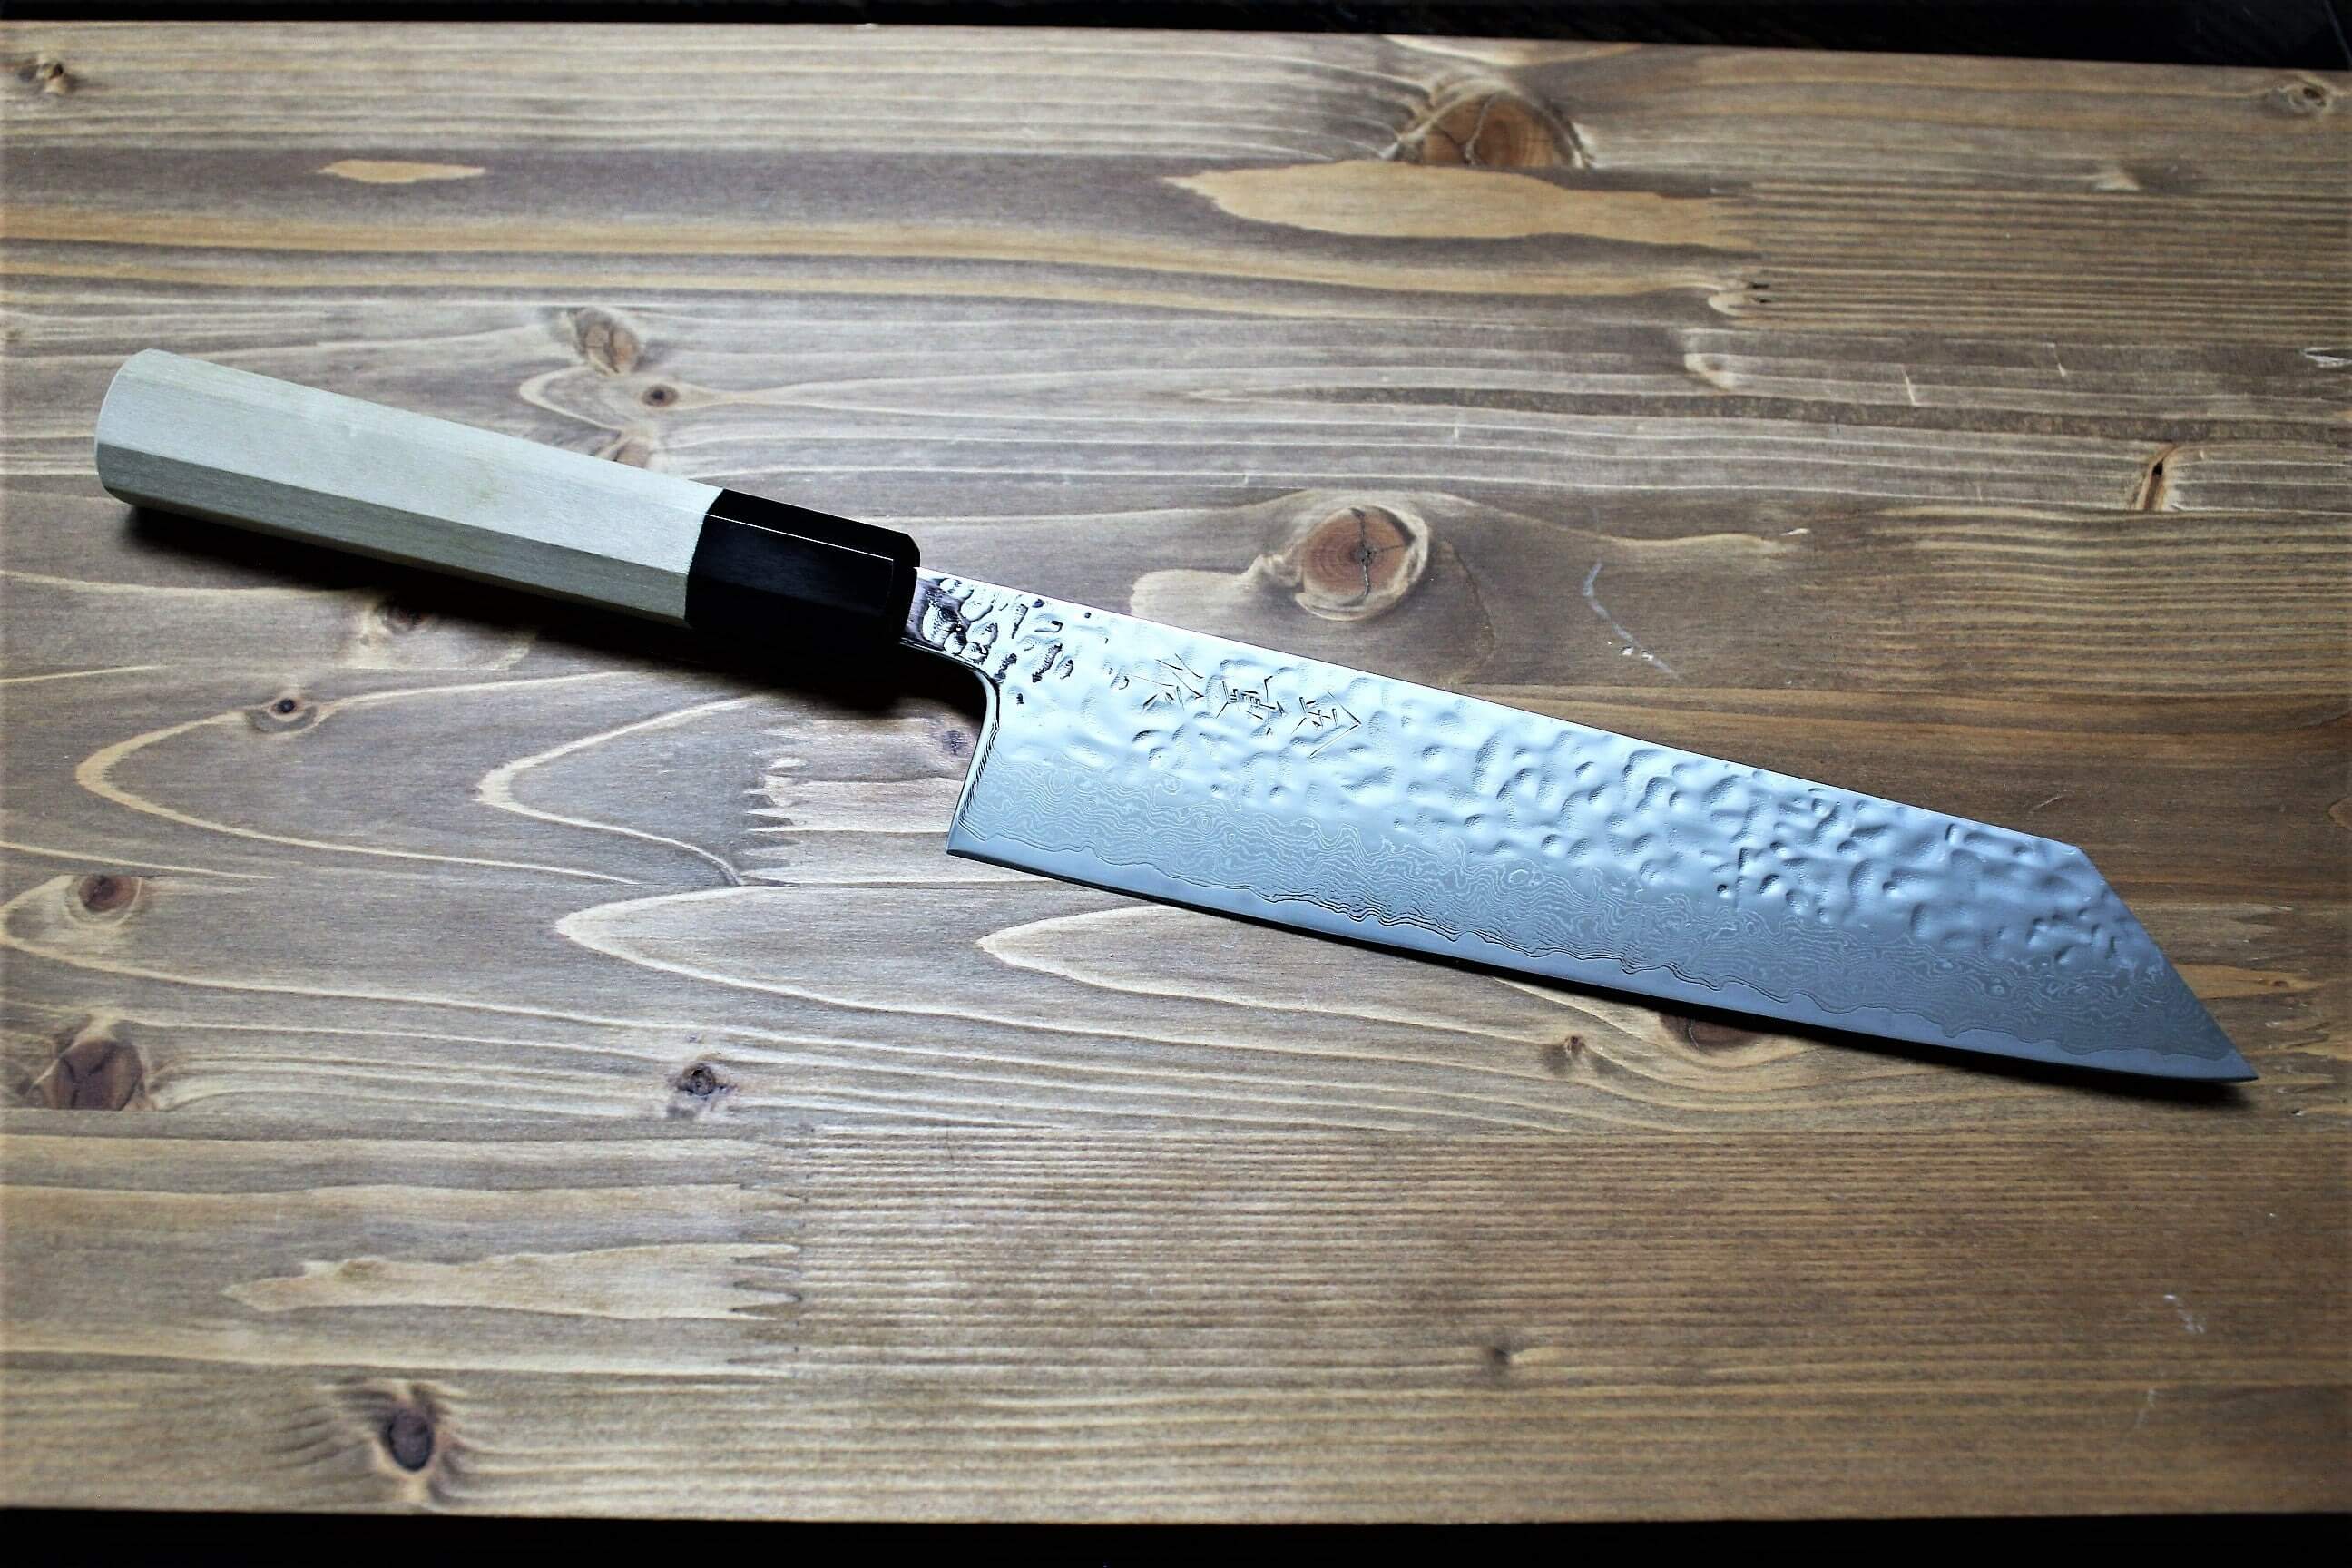 8 Chef Knife High Hardness 67-Layer Japanese Knives Damascus